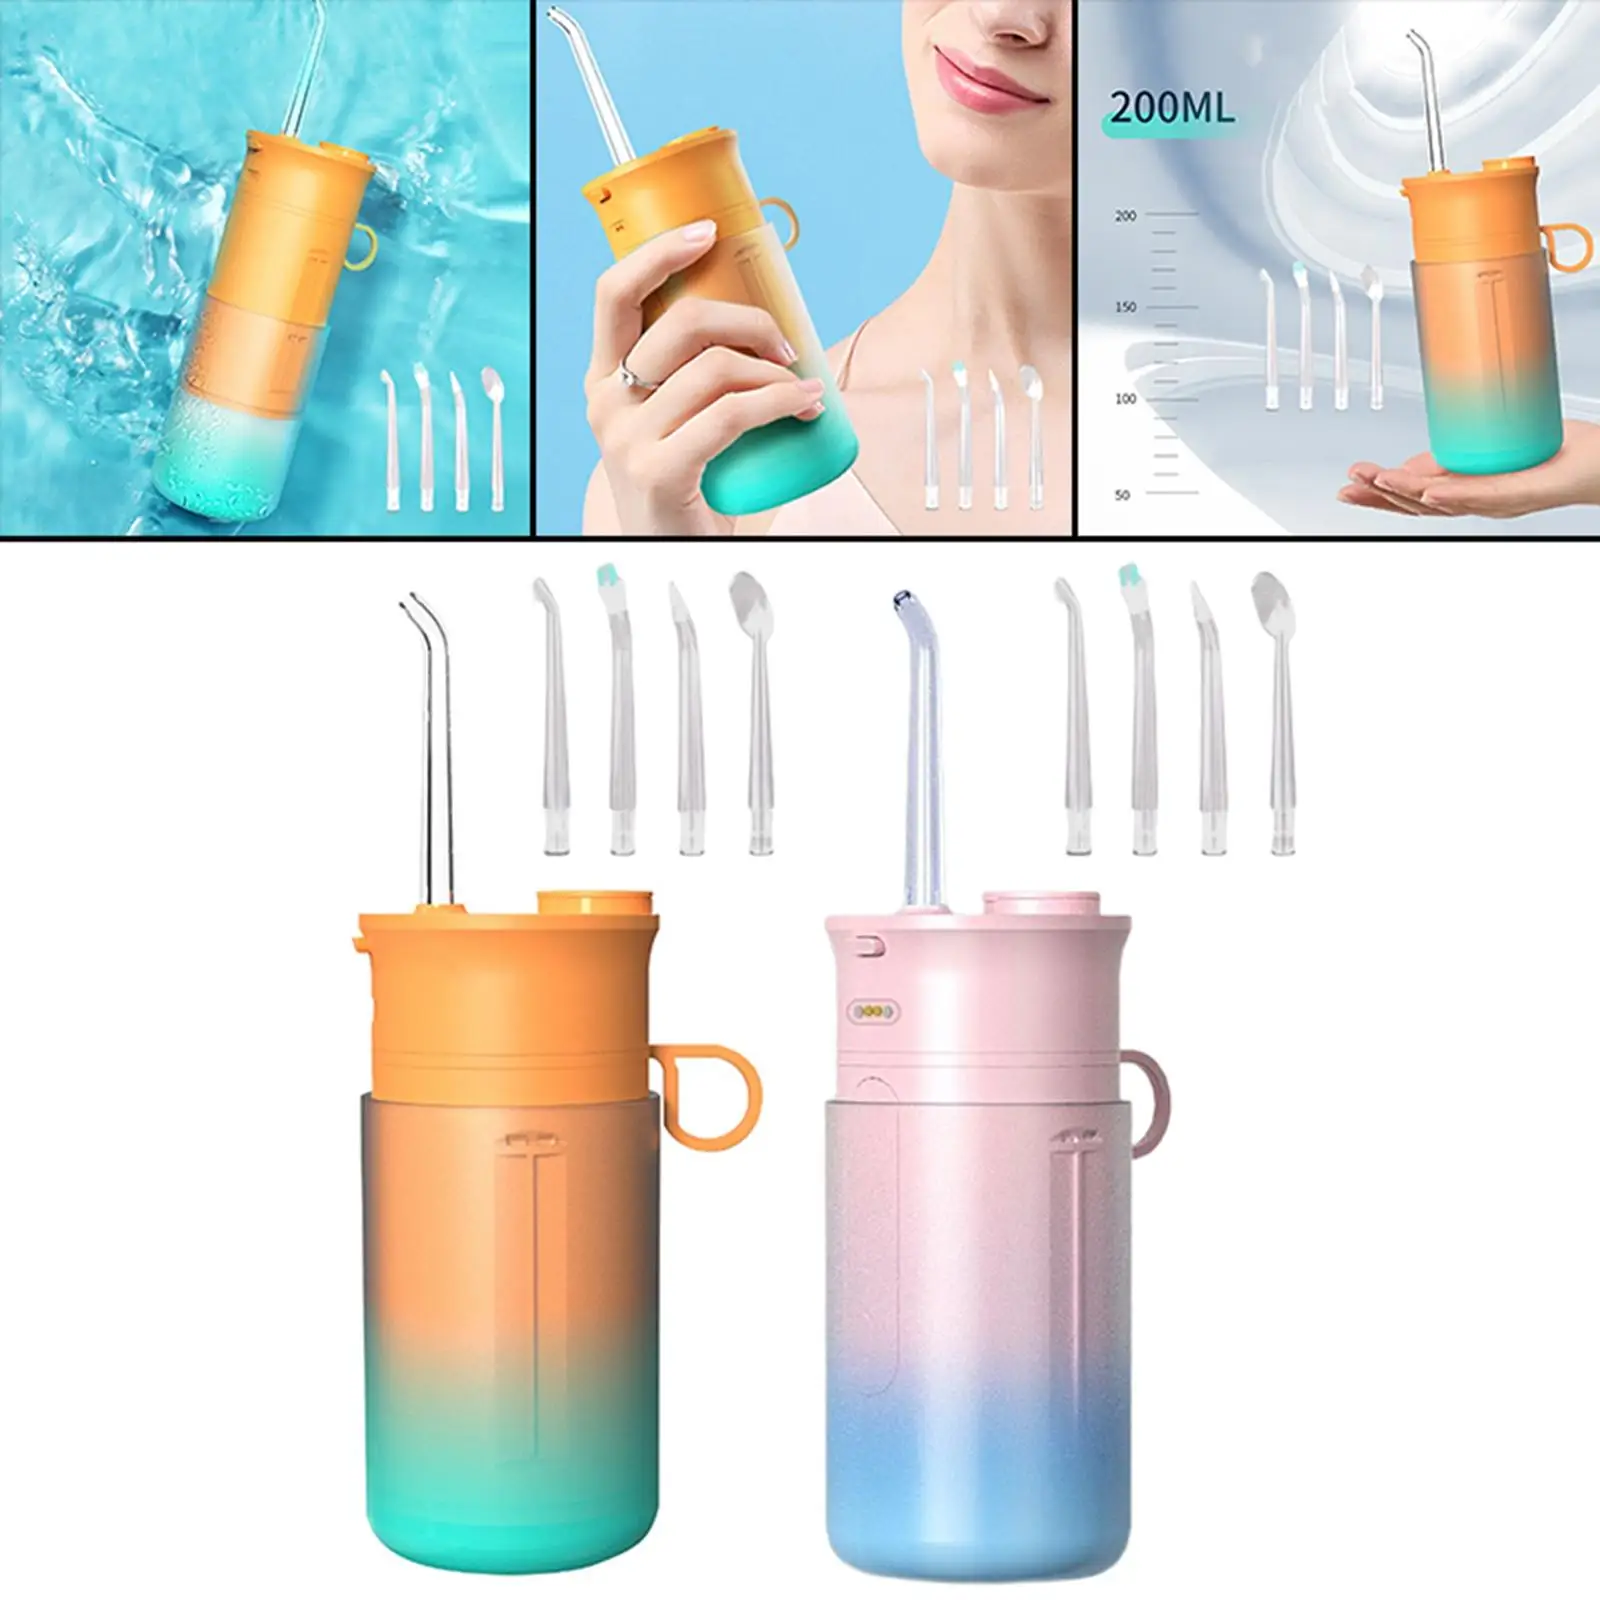 Telescopic Oral Irrigator Electric Flosser Oral Flossing Irrigator Rechargeable IPX7 Professional with 3 Modes 